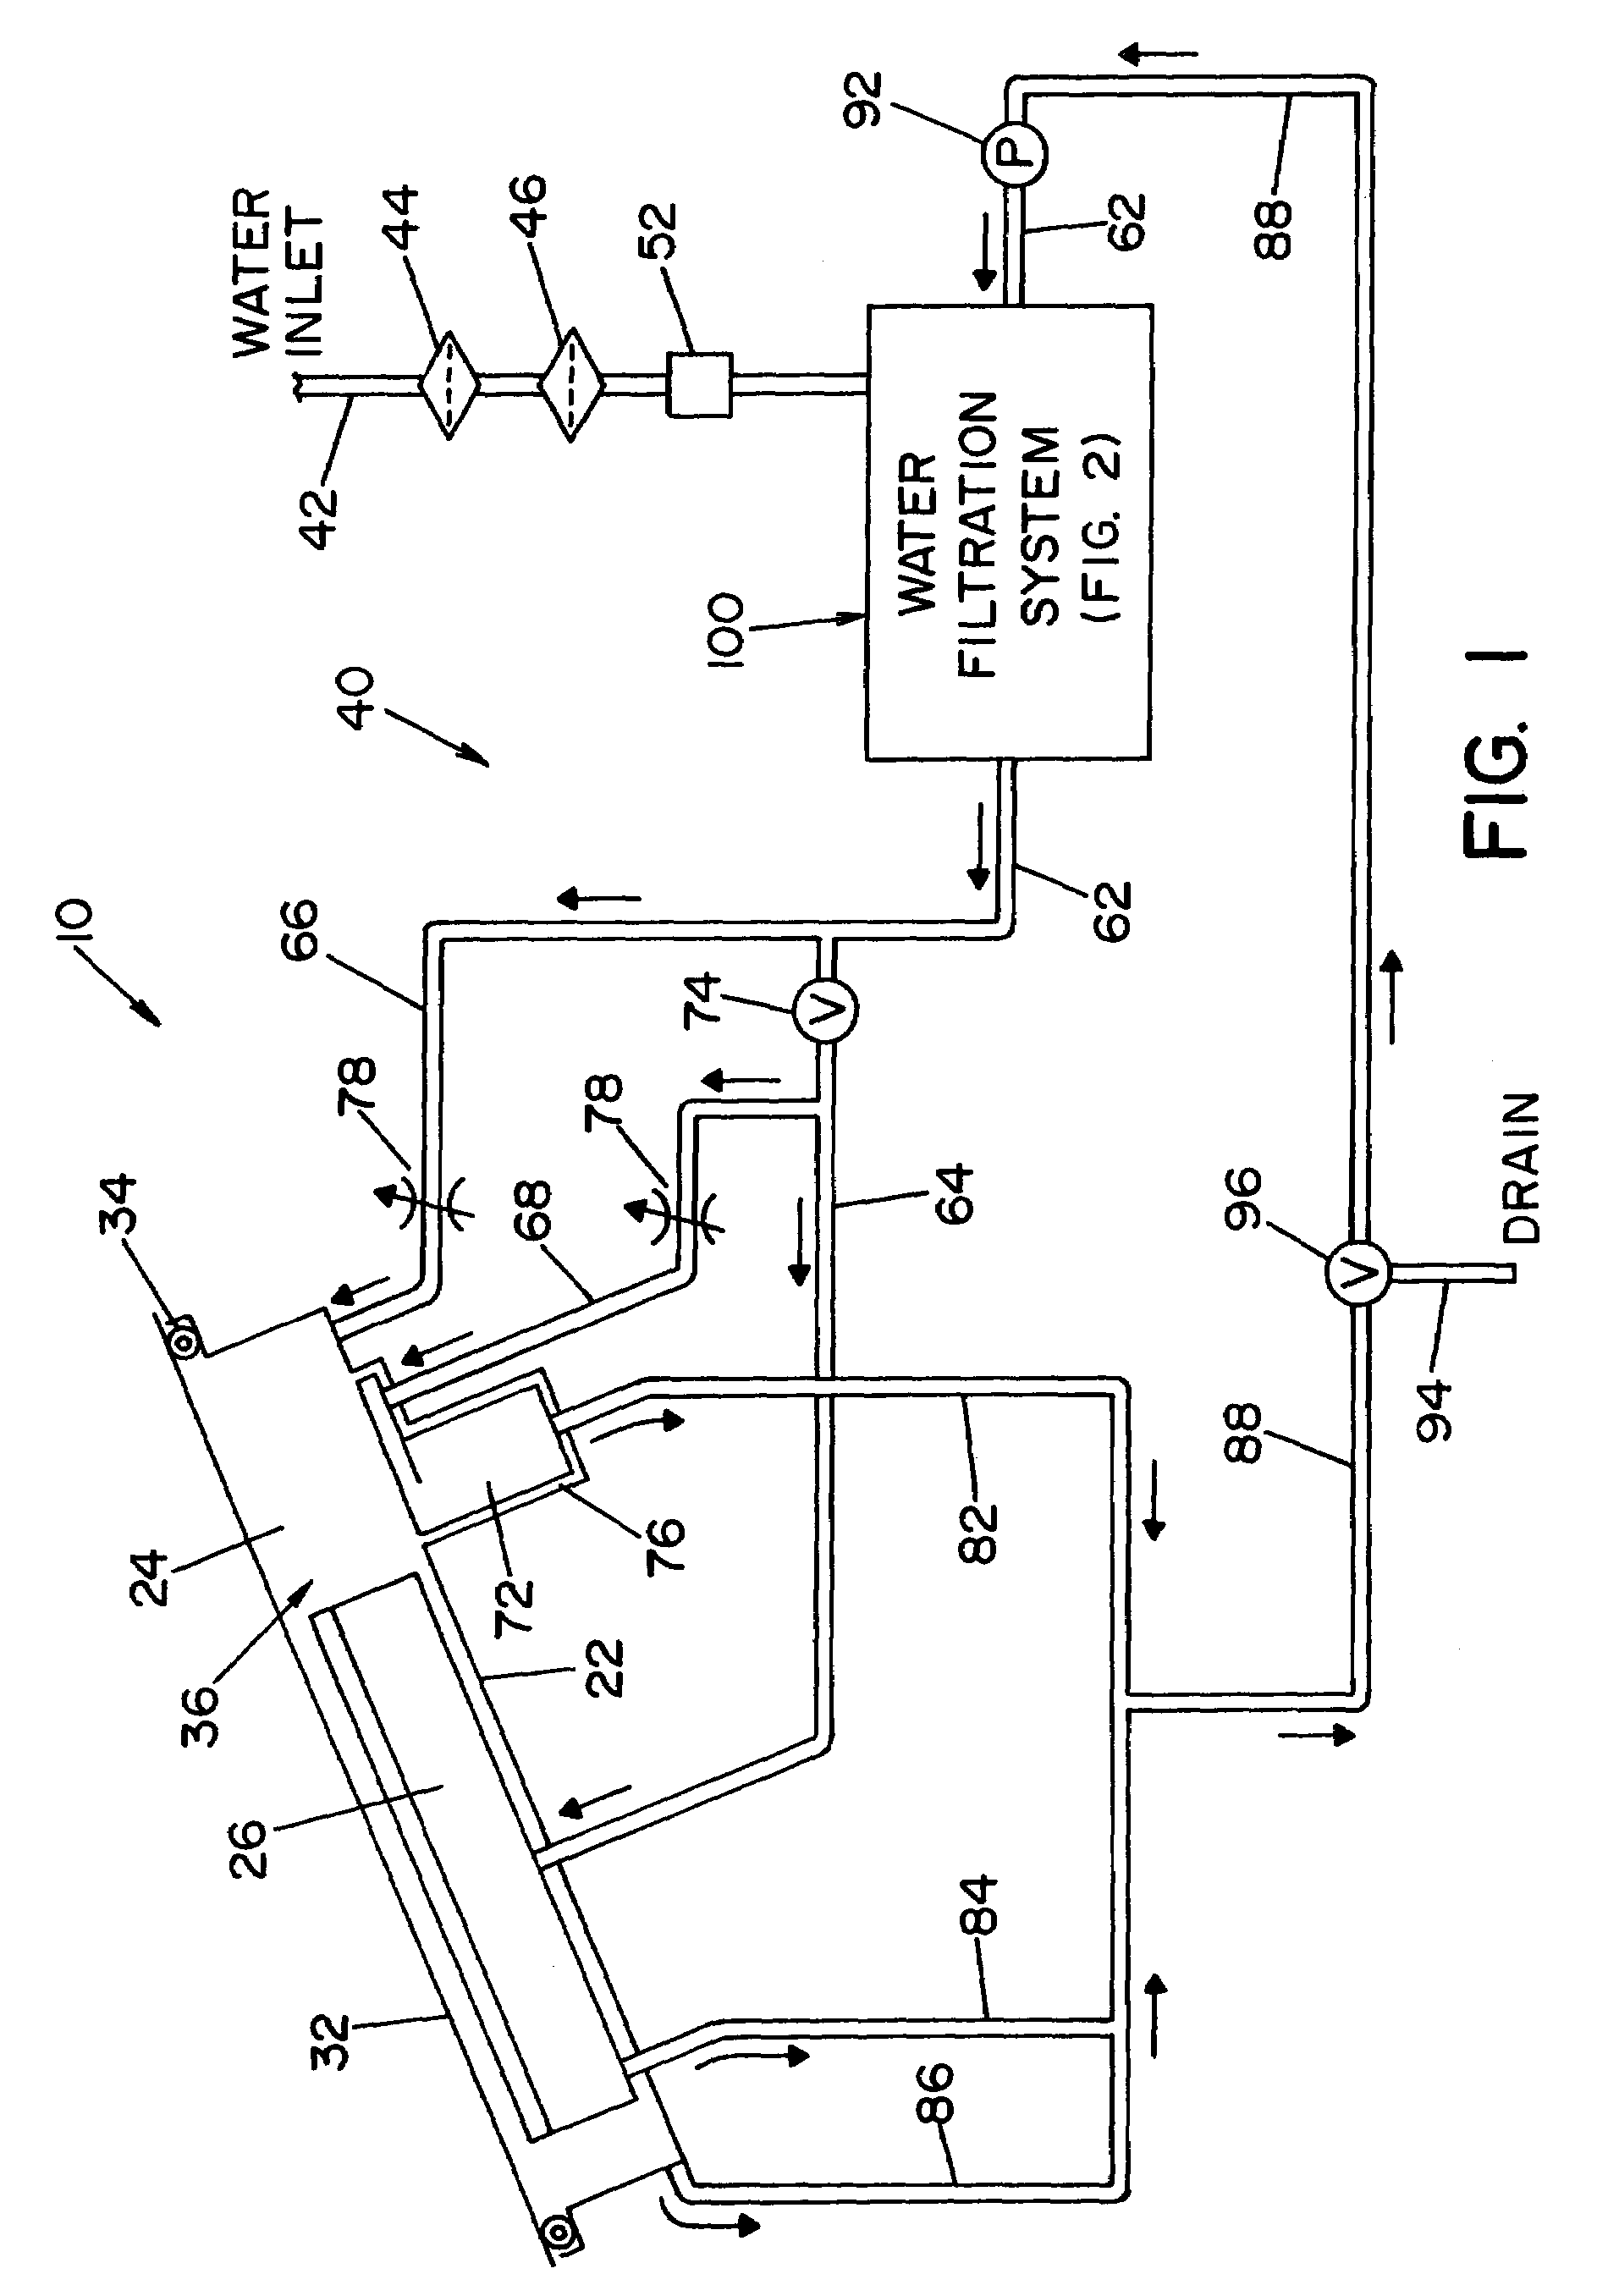 Filter assembly for a reprocessor